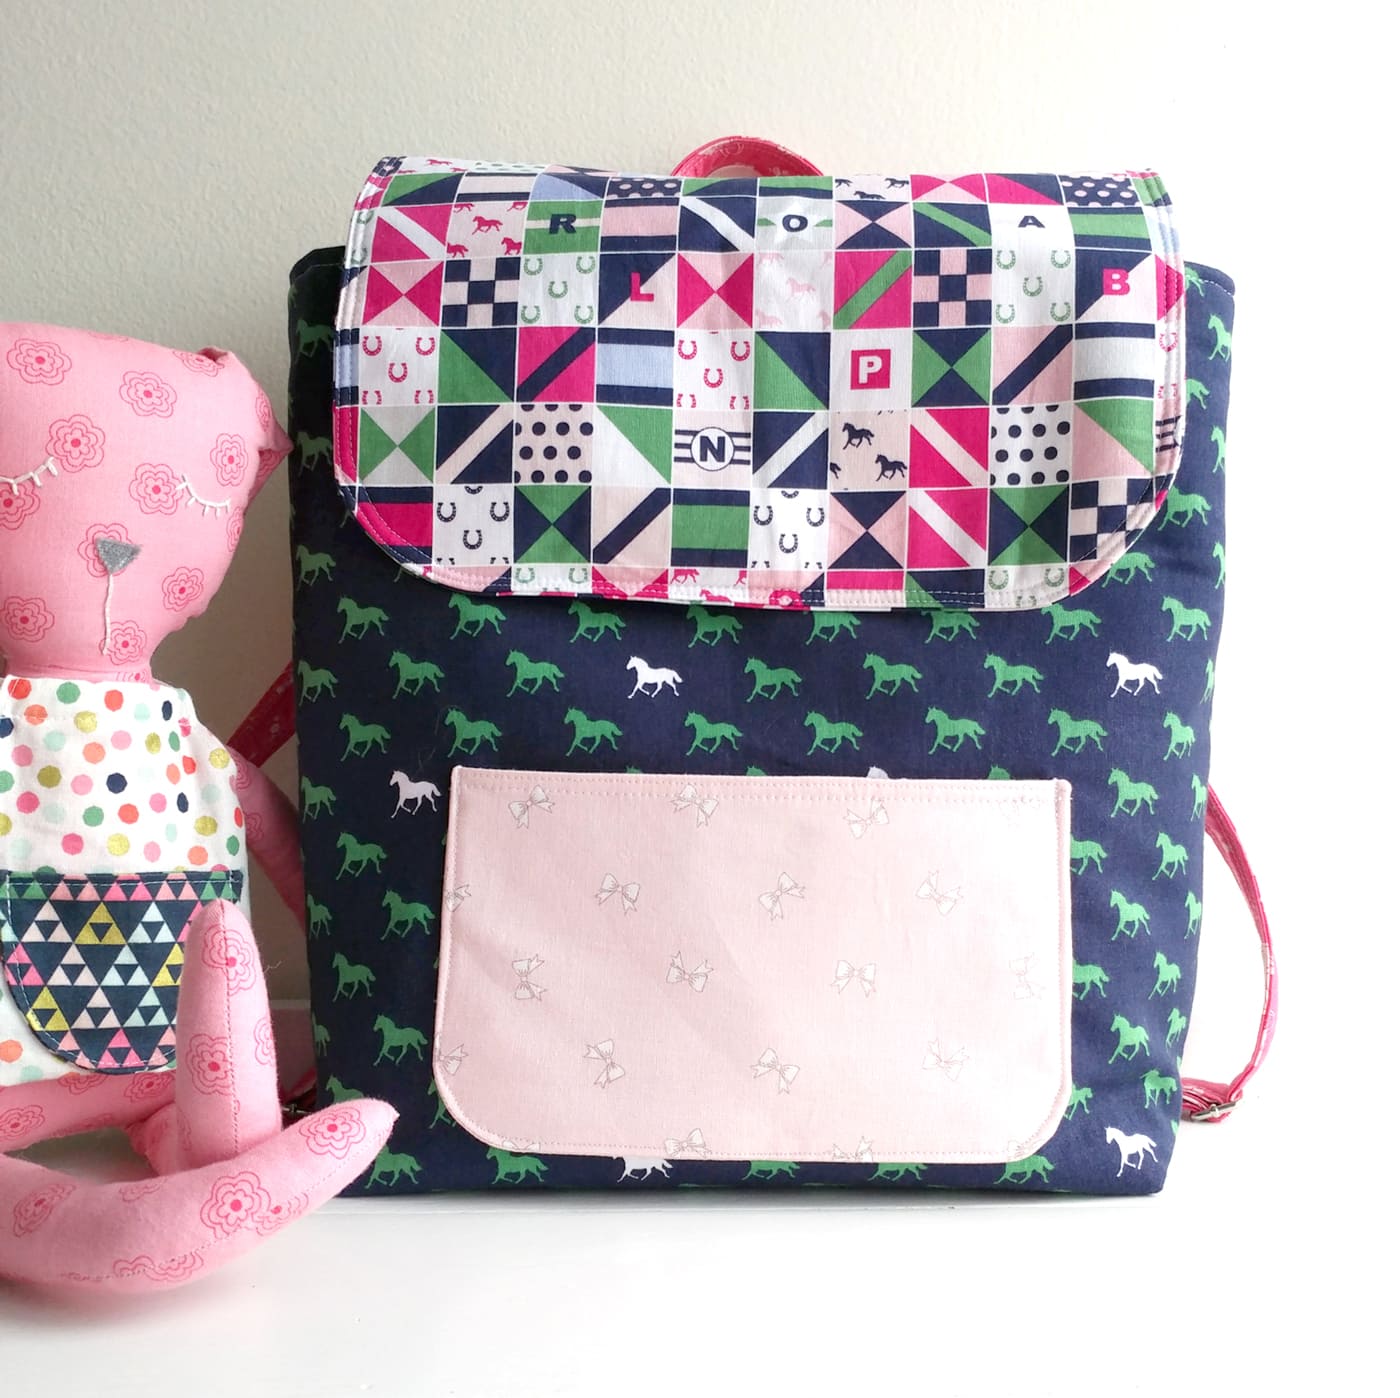 Mini Backpack Coin Purse Pattern - FREE and Easy!